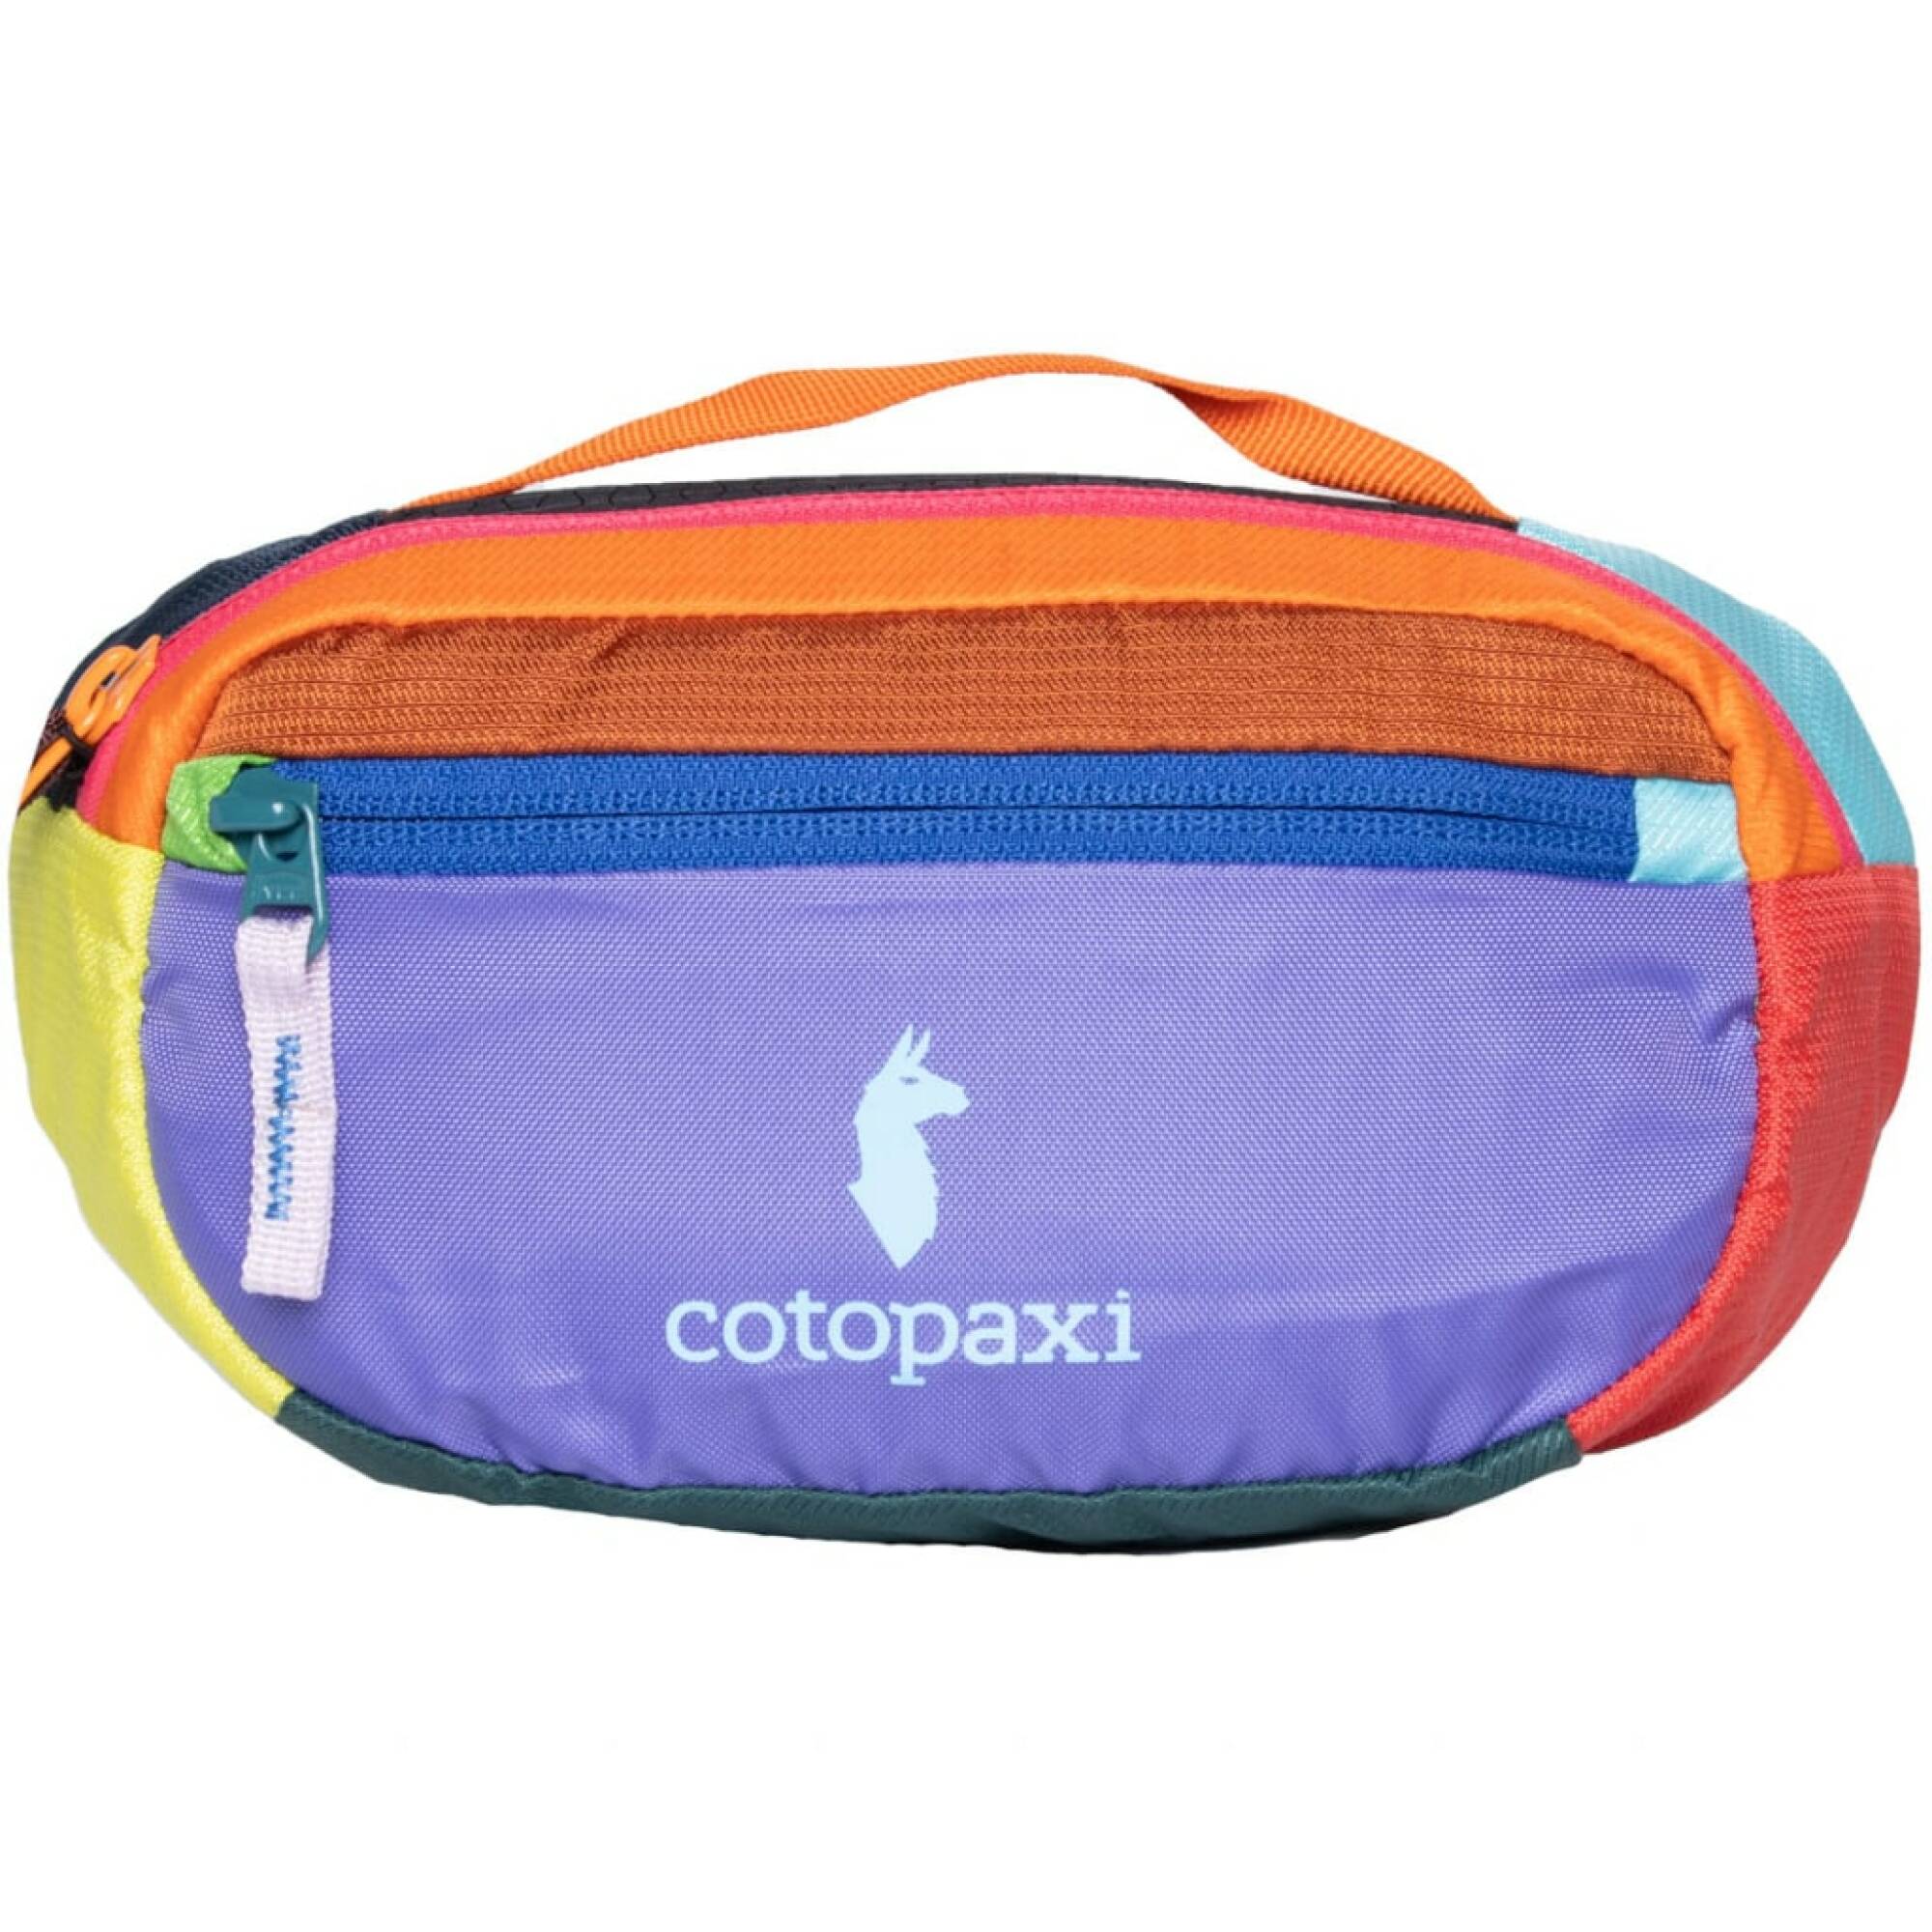 cotopaxi hip pack in colorblocked purple, orange, red, yellow, and teal